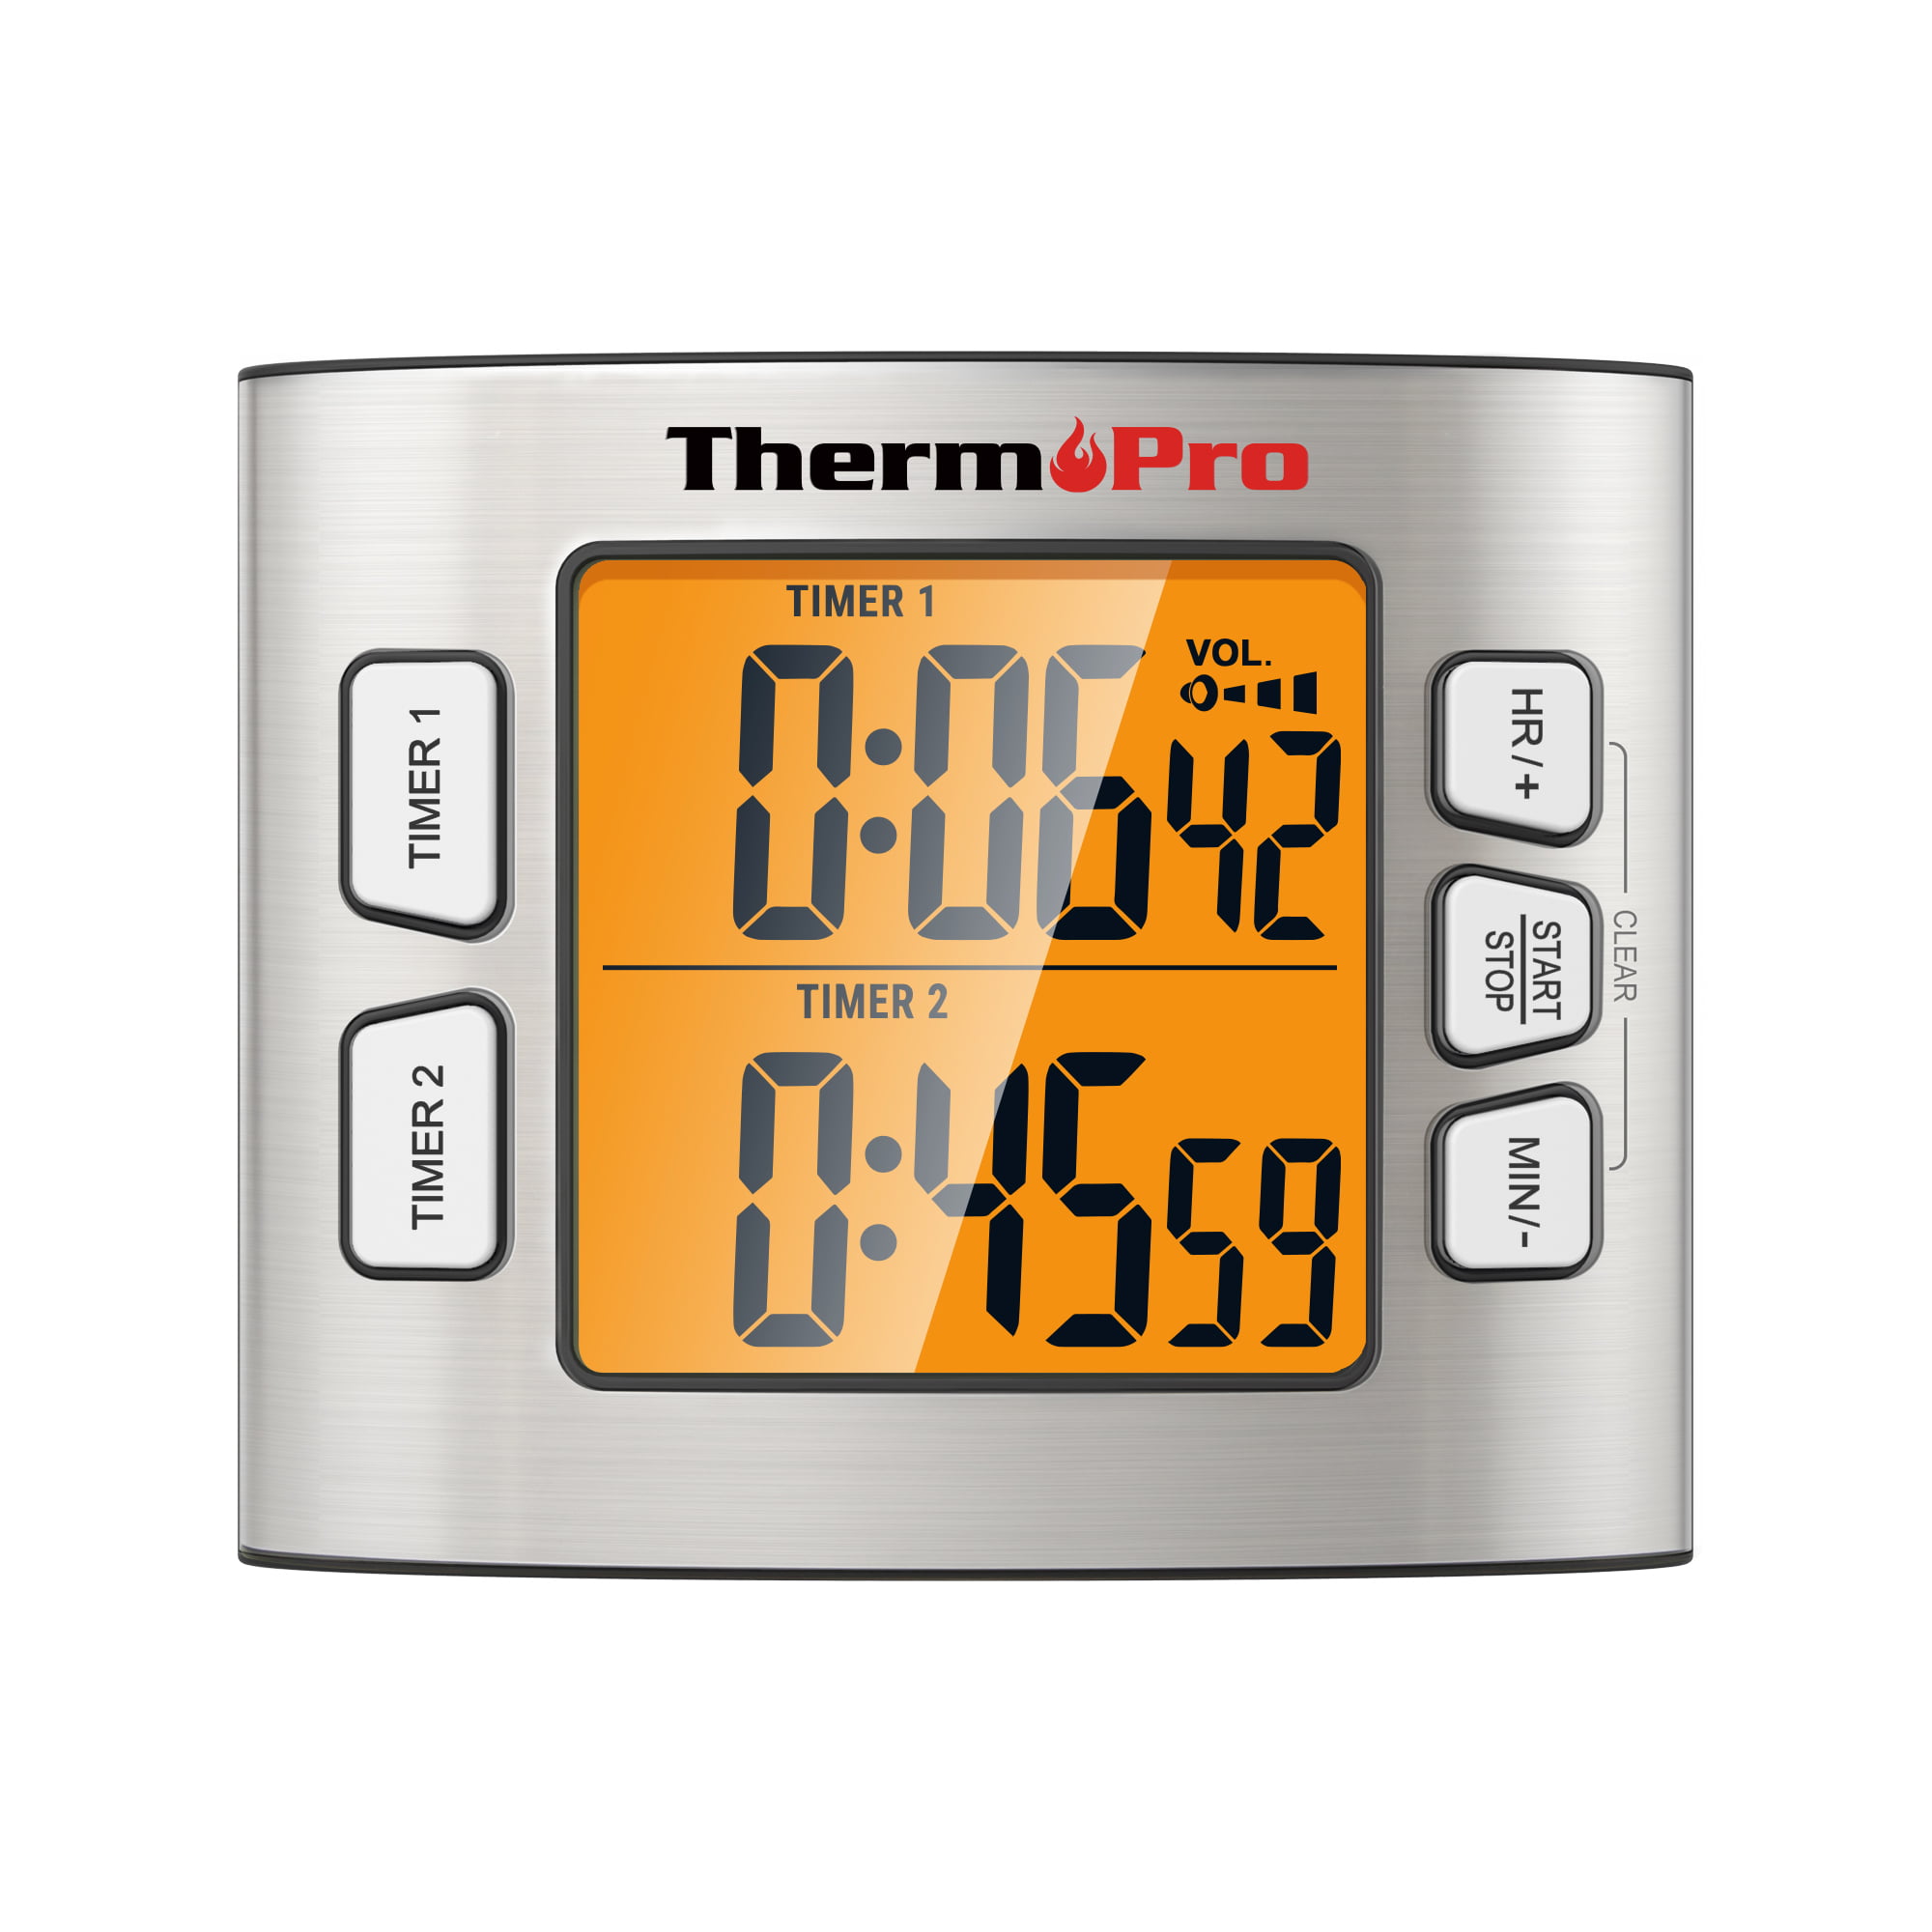 ThermoPro TM03 Digital Timer for Kids & Teachers, Kitchen Timers for  Cooking with 2-Level Alarm Volume, Countdown Timer Stopwatch for Classroom